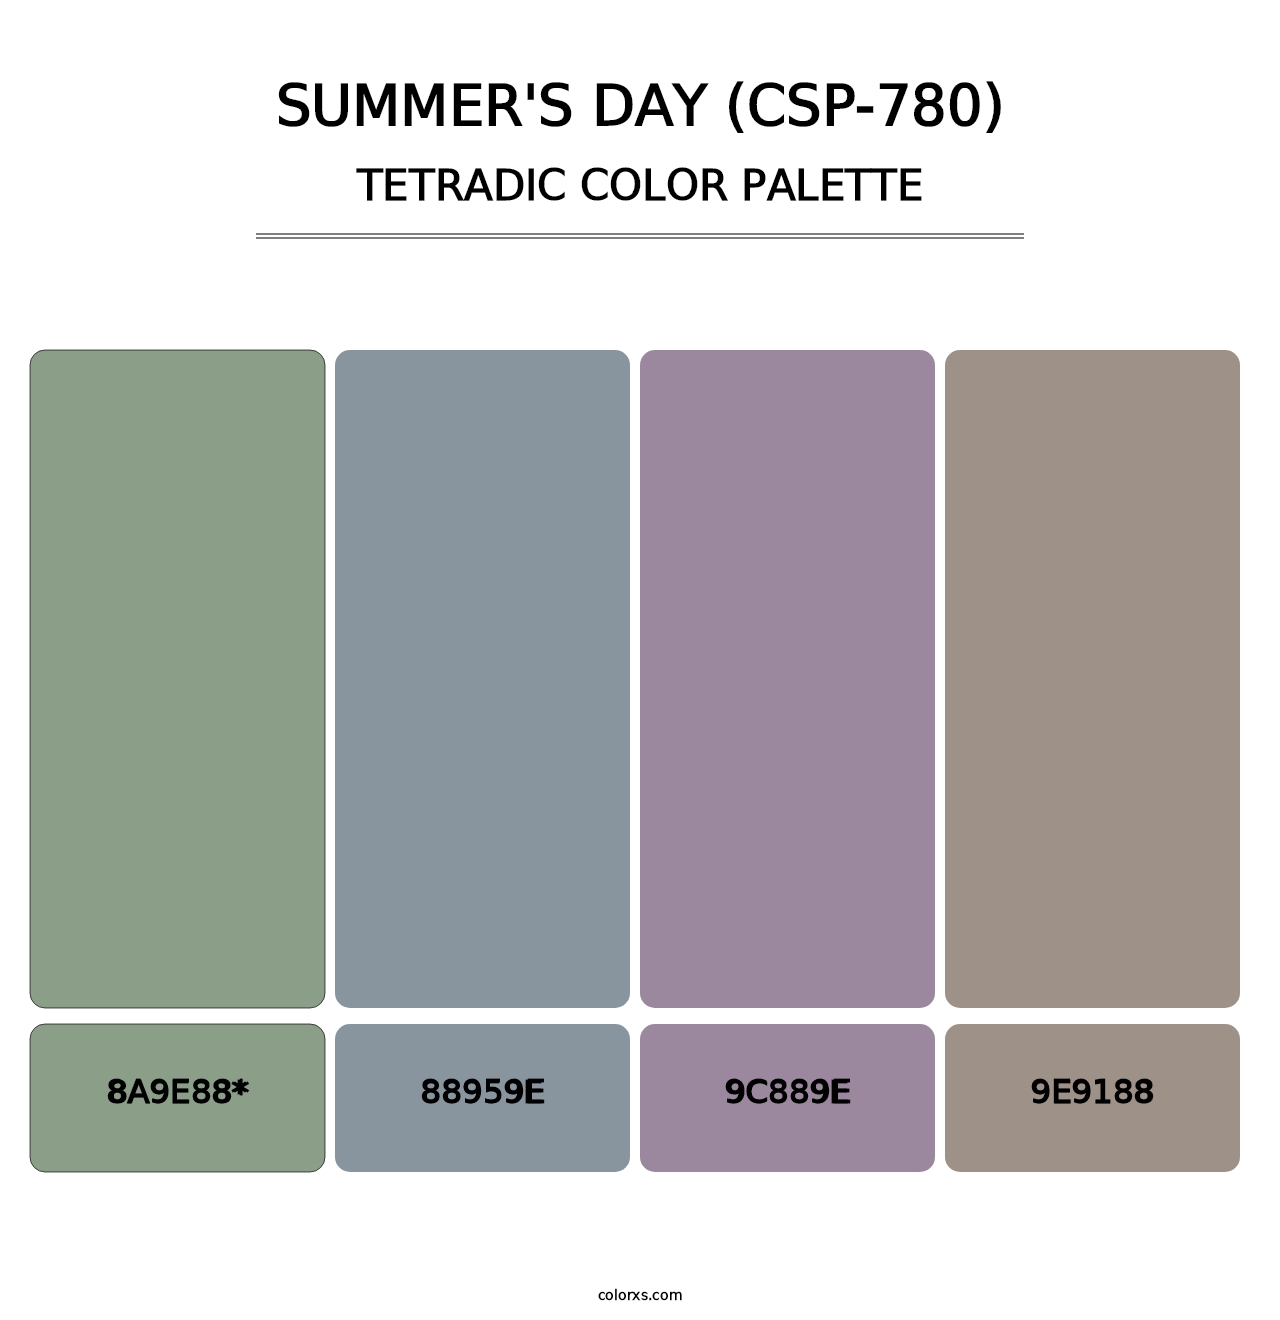 Summer's Day (CSP-780) - Tetradic Color Palette